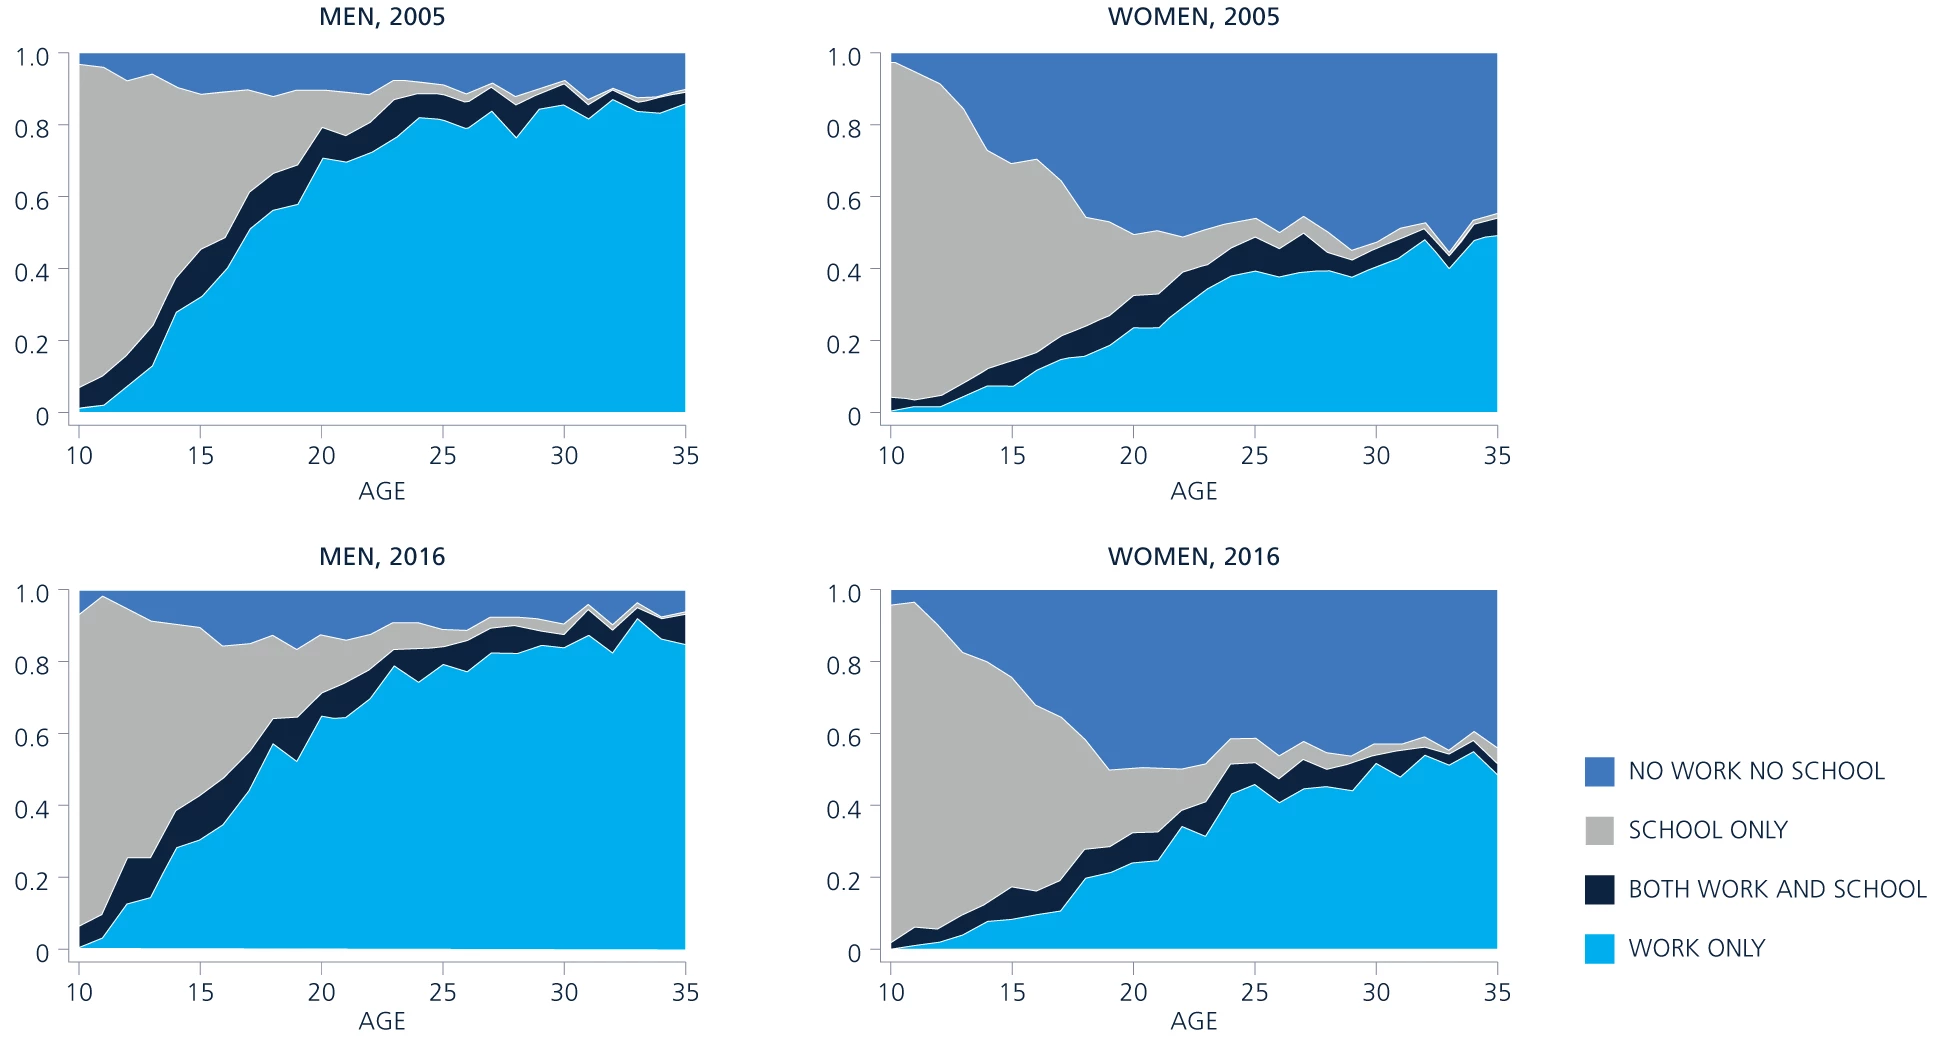 Figure 2: Transitions from school to adult life for men and women, 2005 and 2016